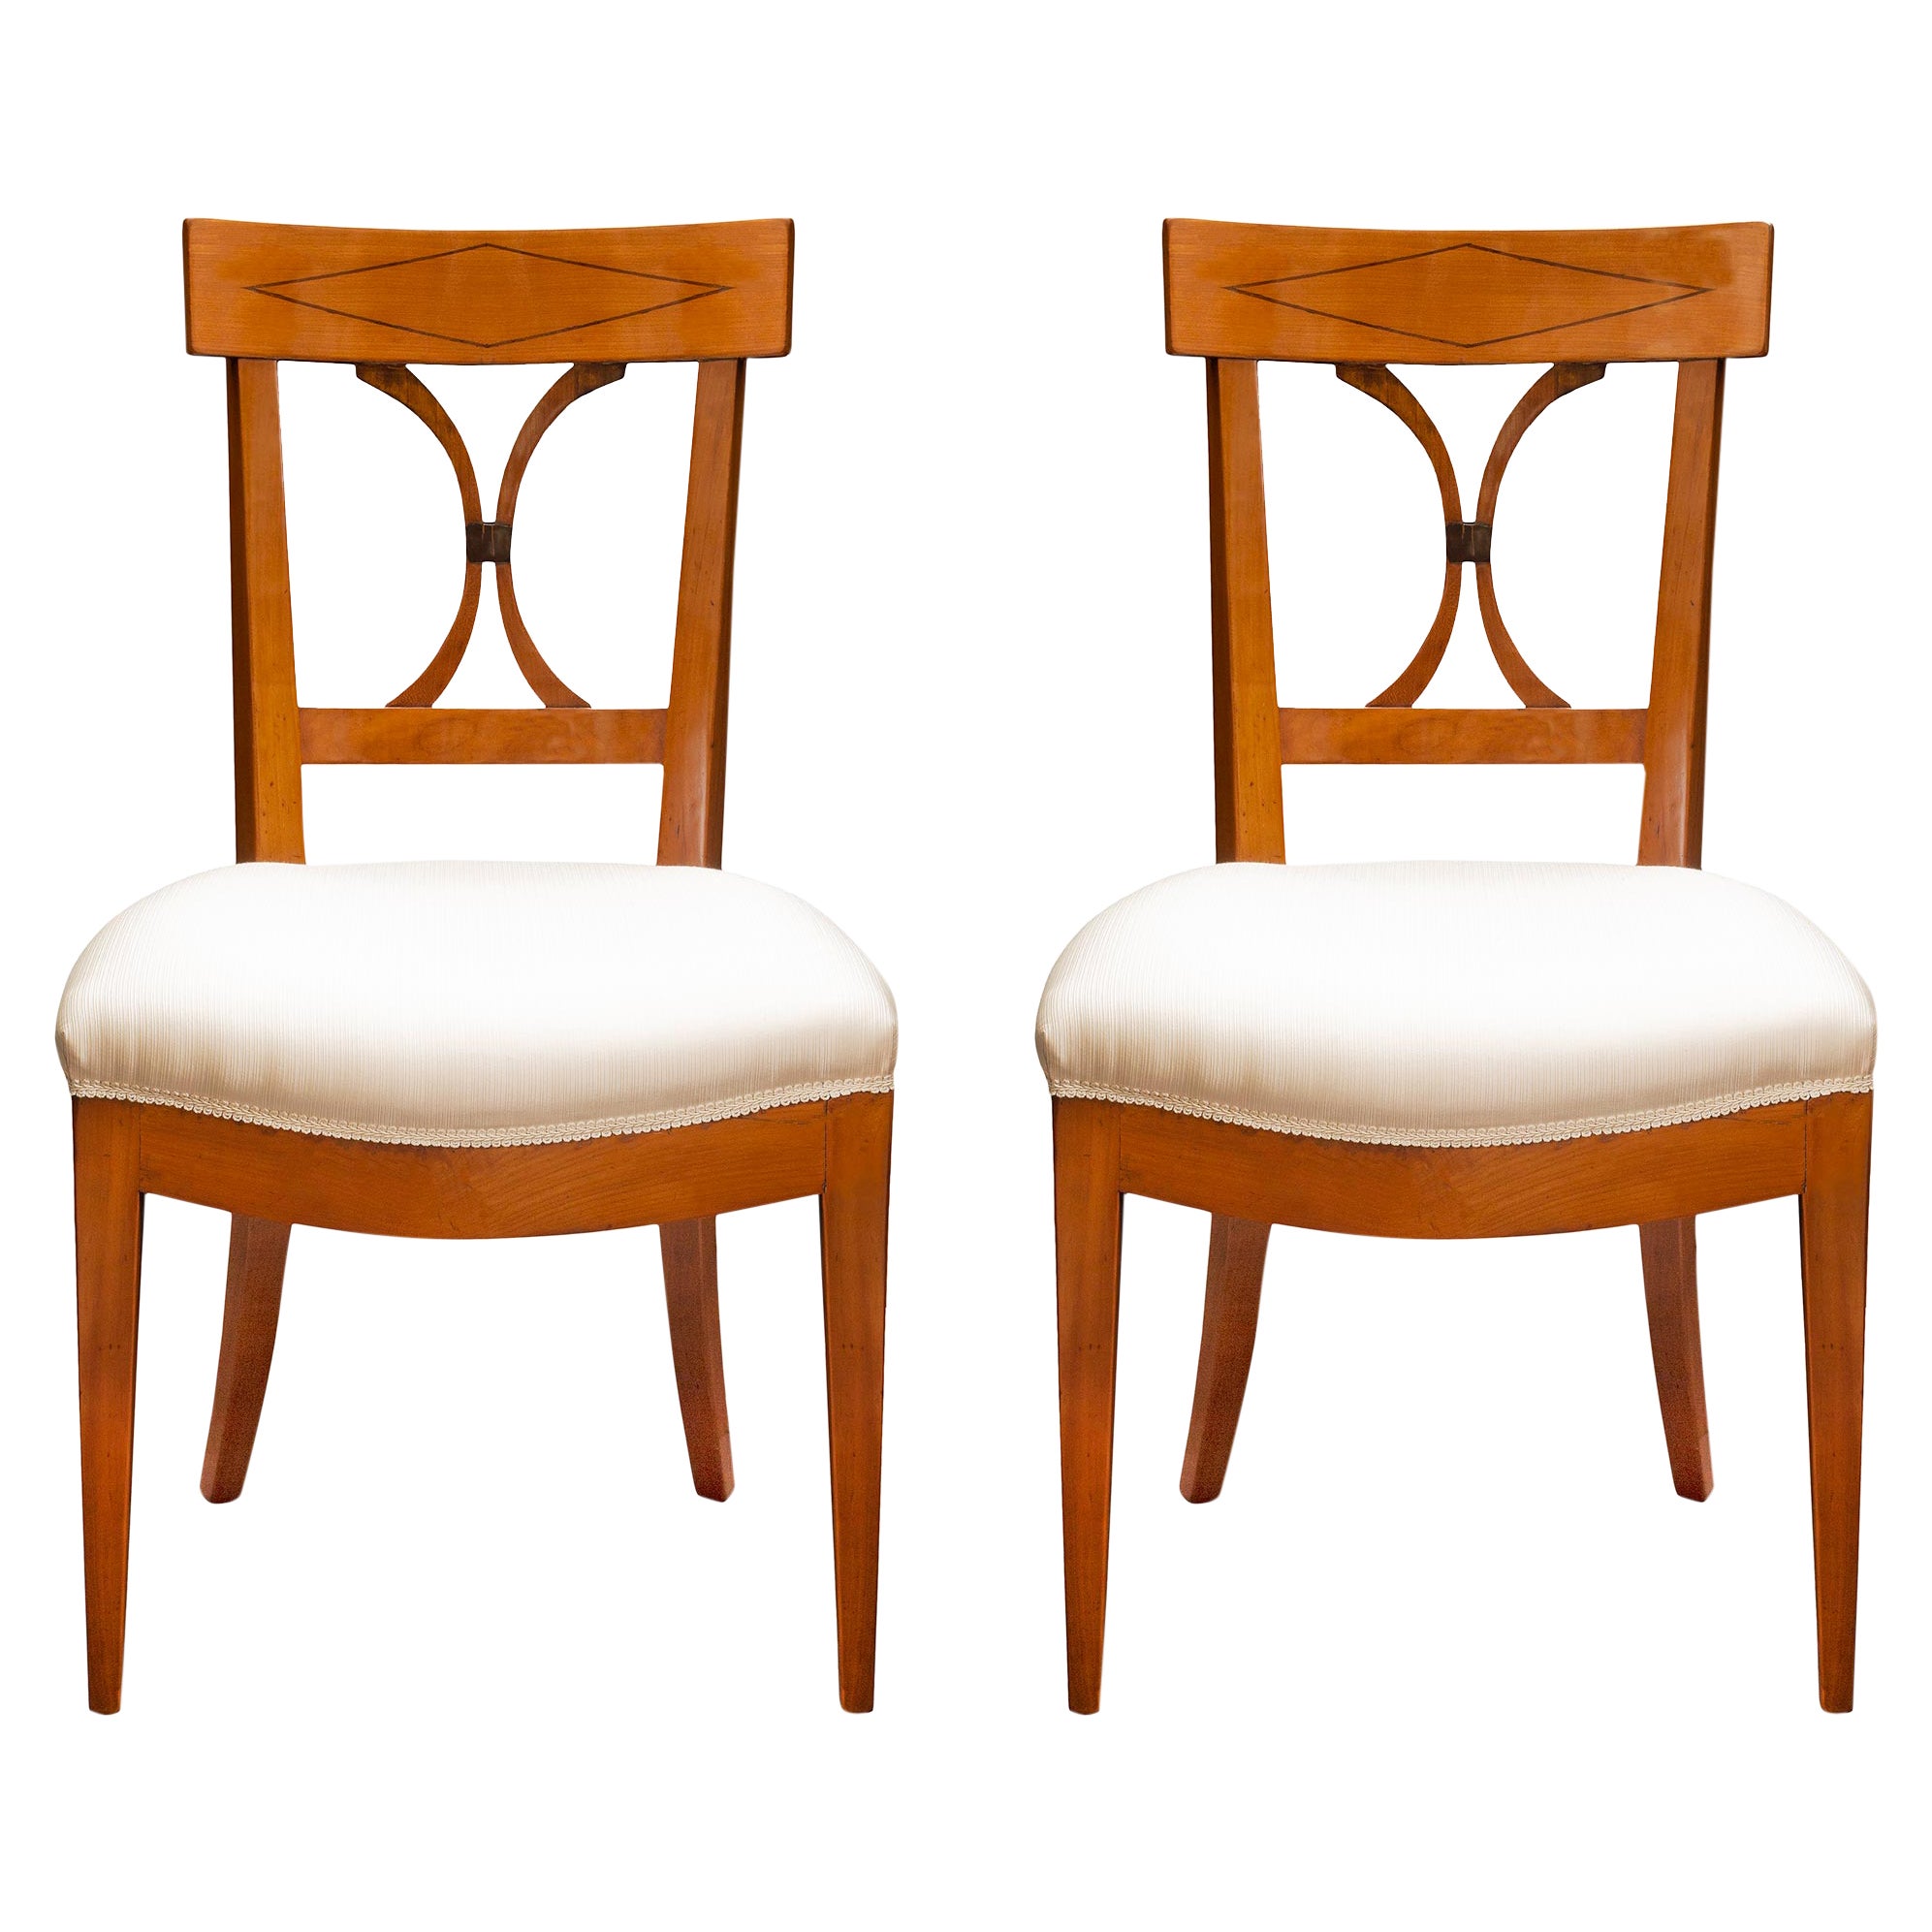 Pair of 19th Century French Directoire Style Cherrywood Chairs